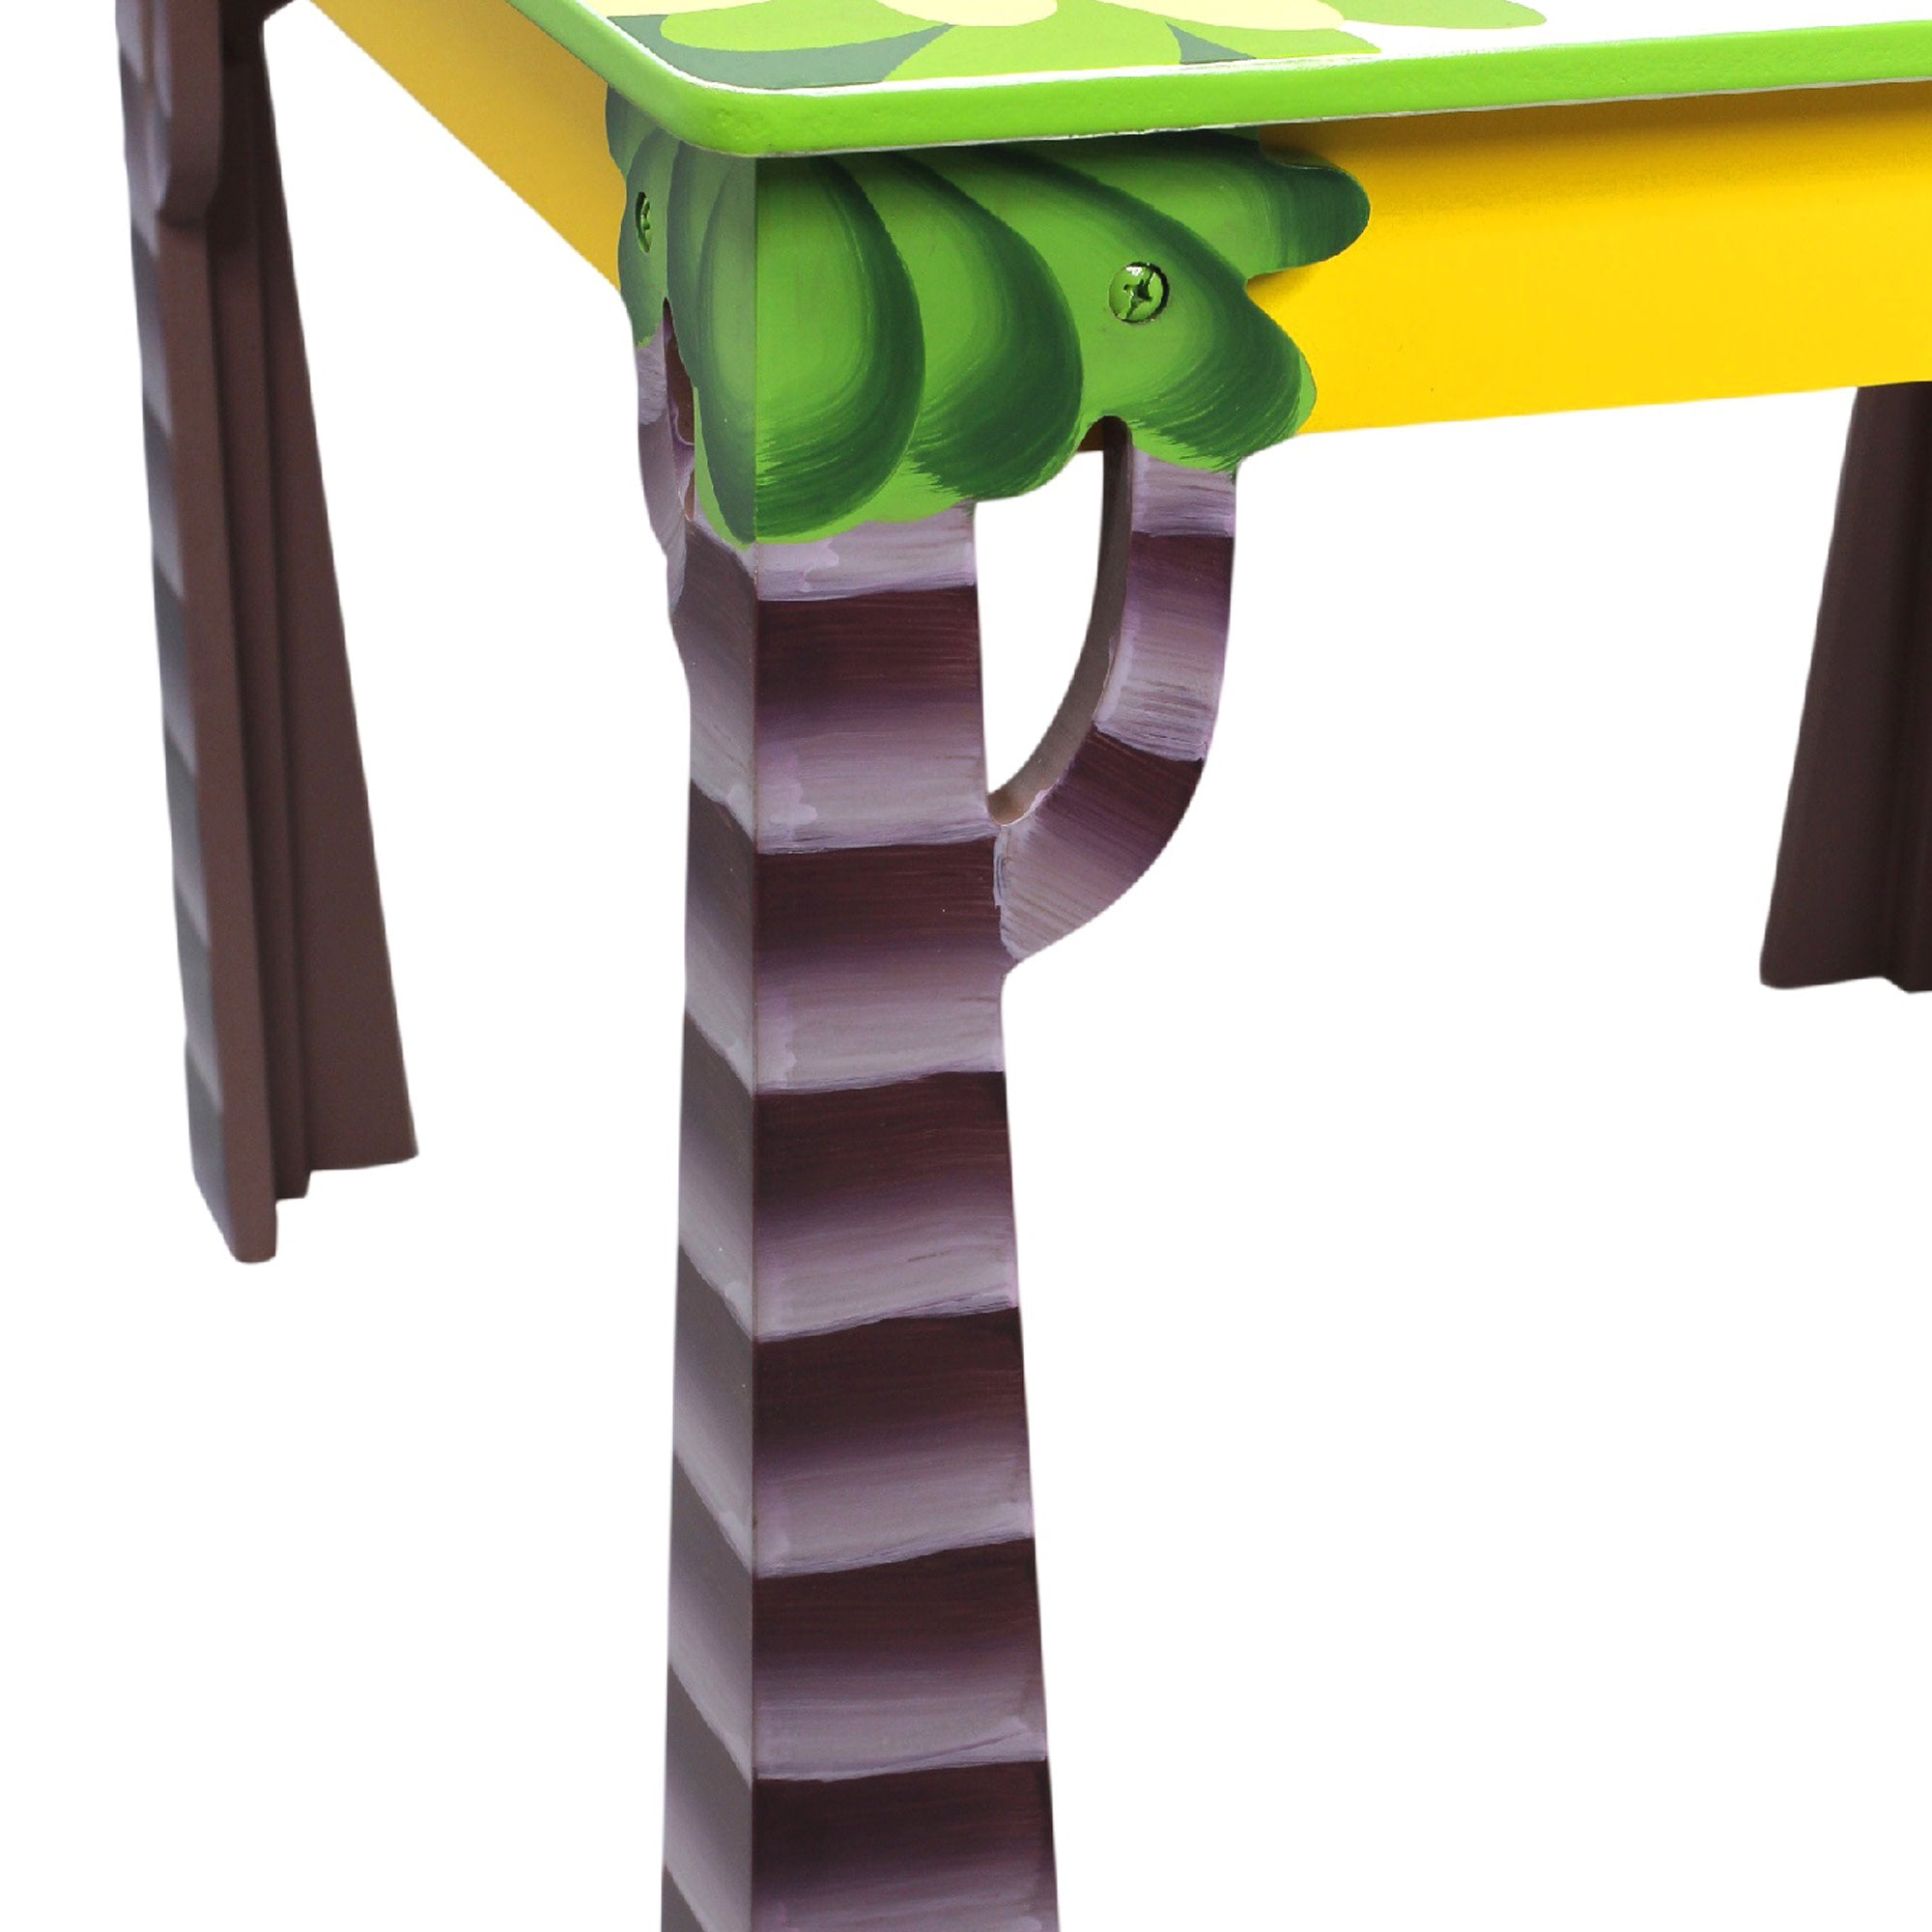 Fantasy Fields Toy Furniture Dinosaur Kingdom Table with Tree Trunk Legs, Pterodactyl Top, & Painted Details, Multicolor